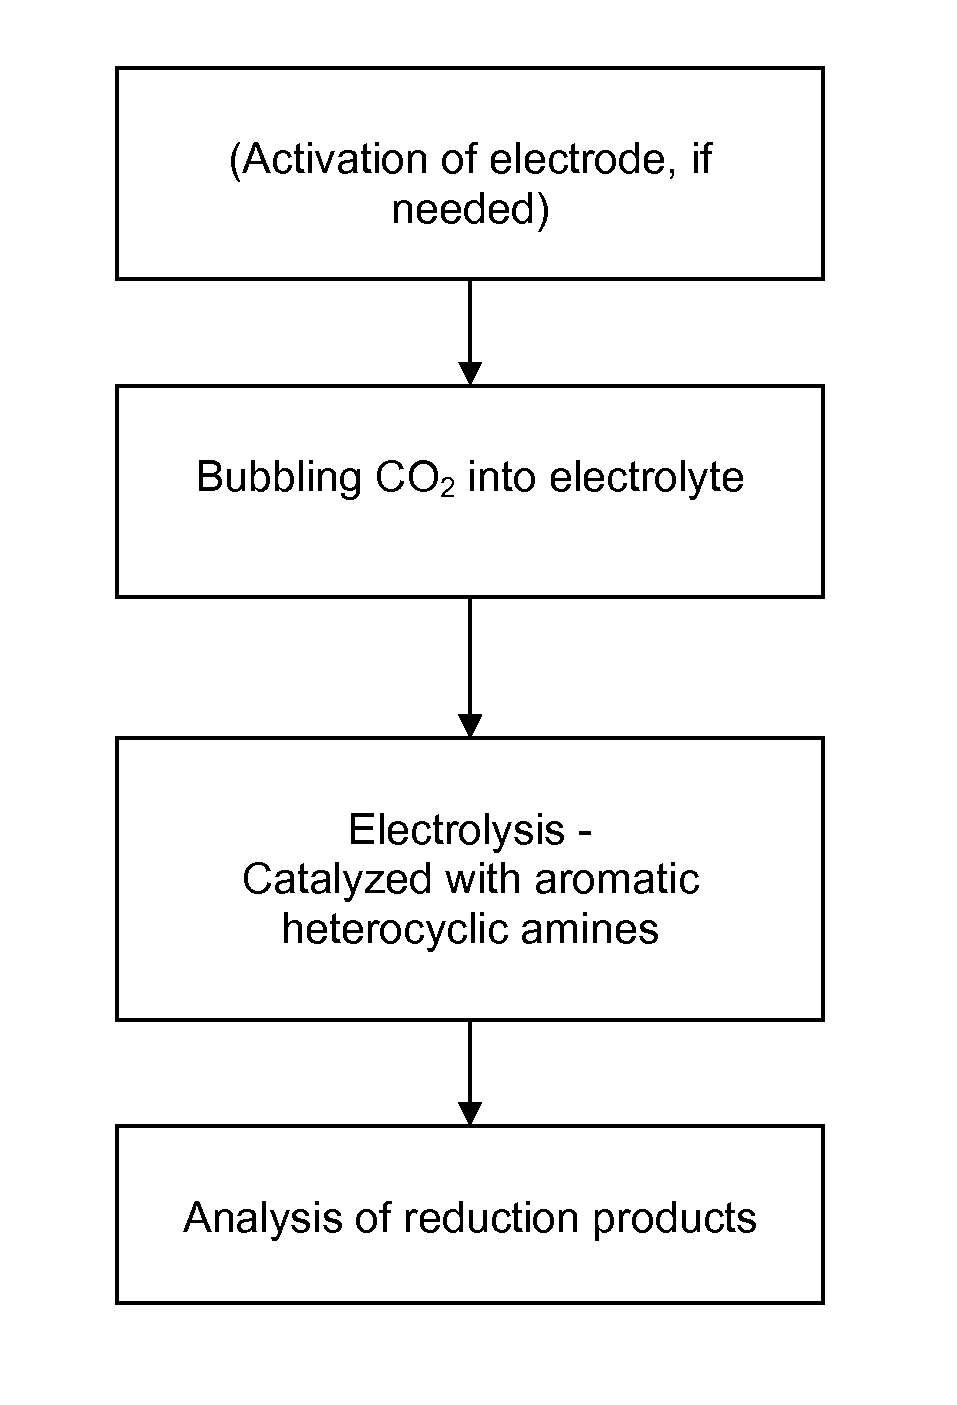 Conversion of carbon dioxide to organic products